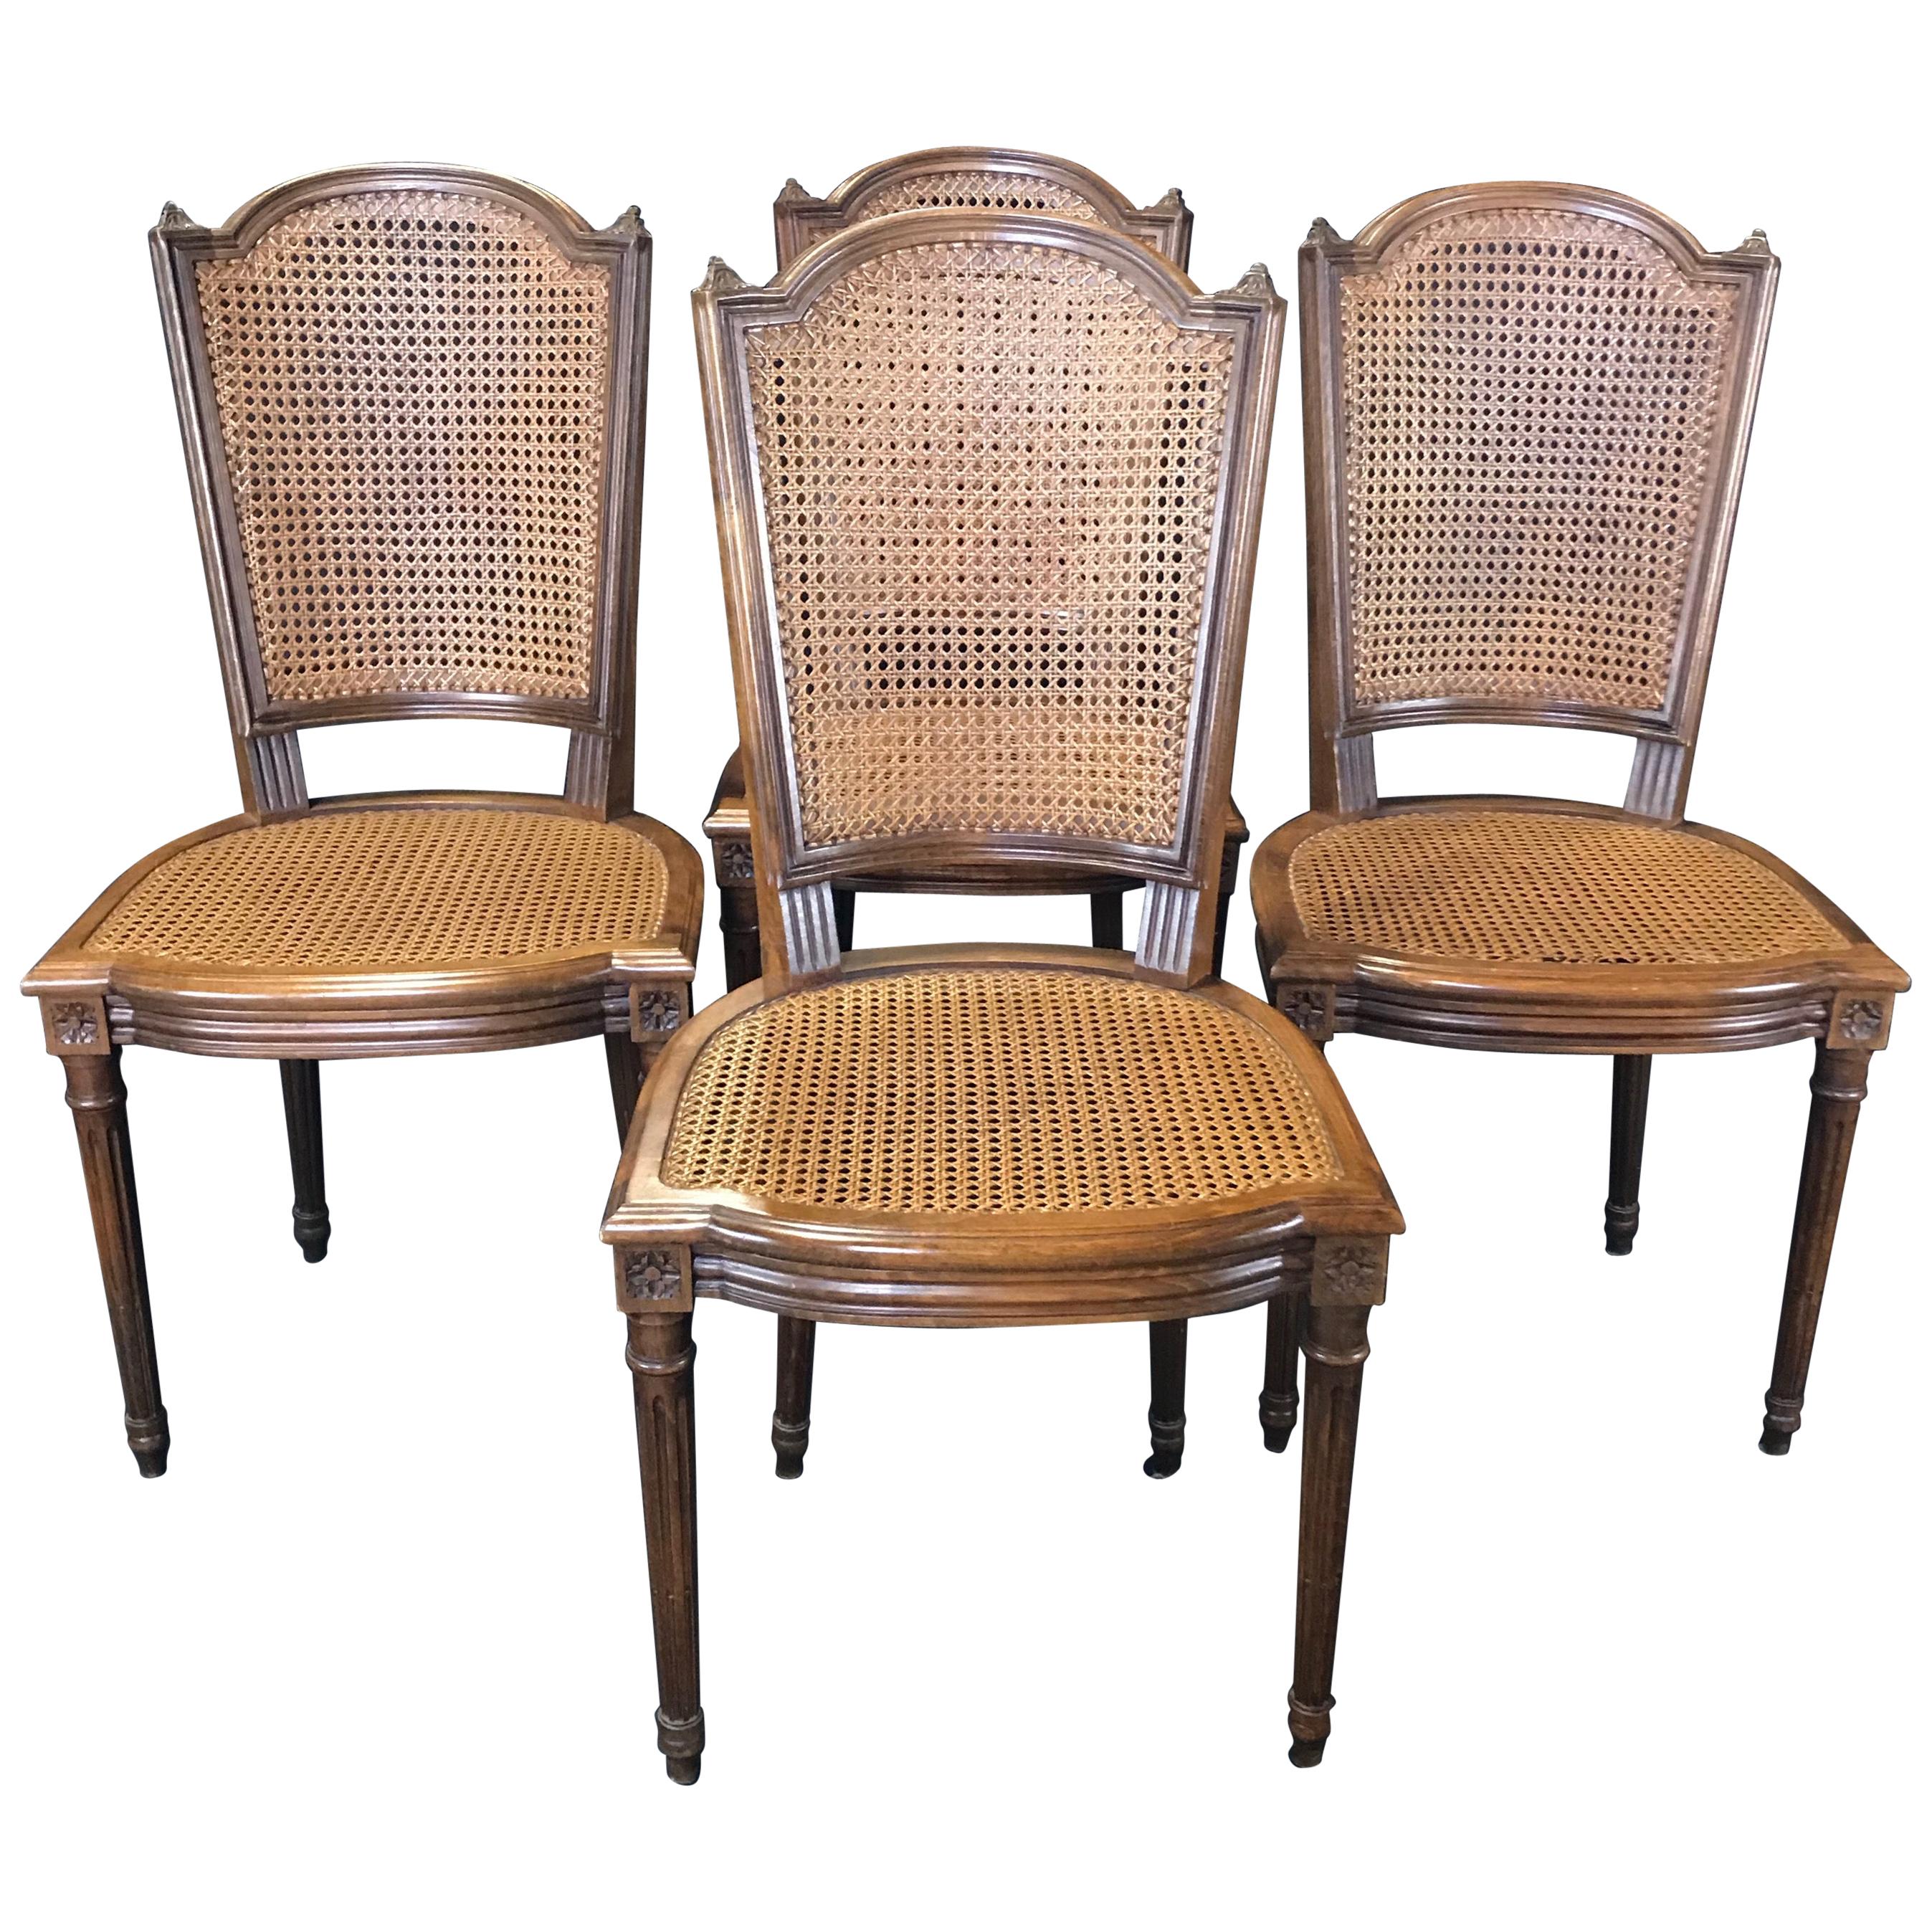 Classically Beautiful Set of 4 French Louis XVI Walnut and Caned Dining Chairs